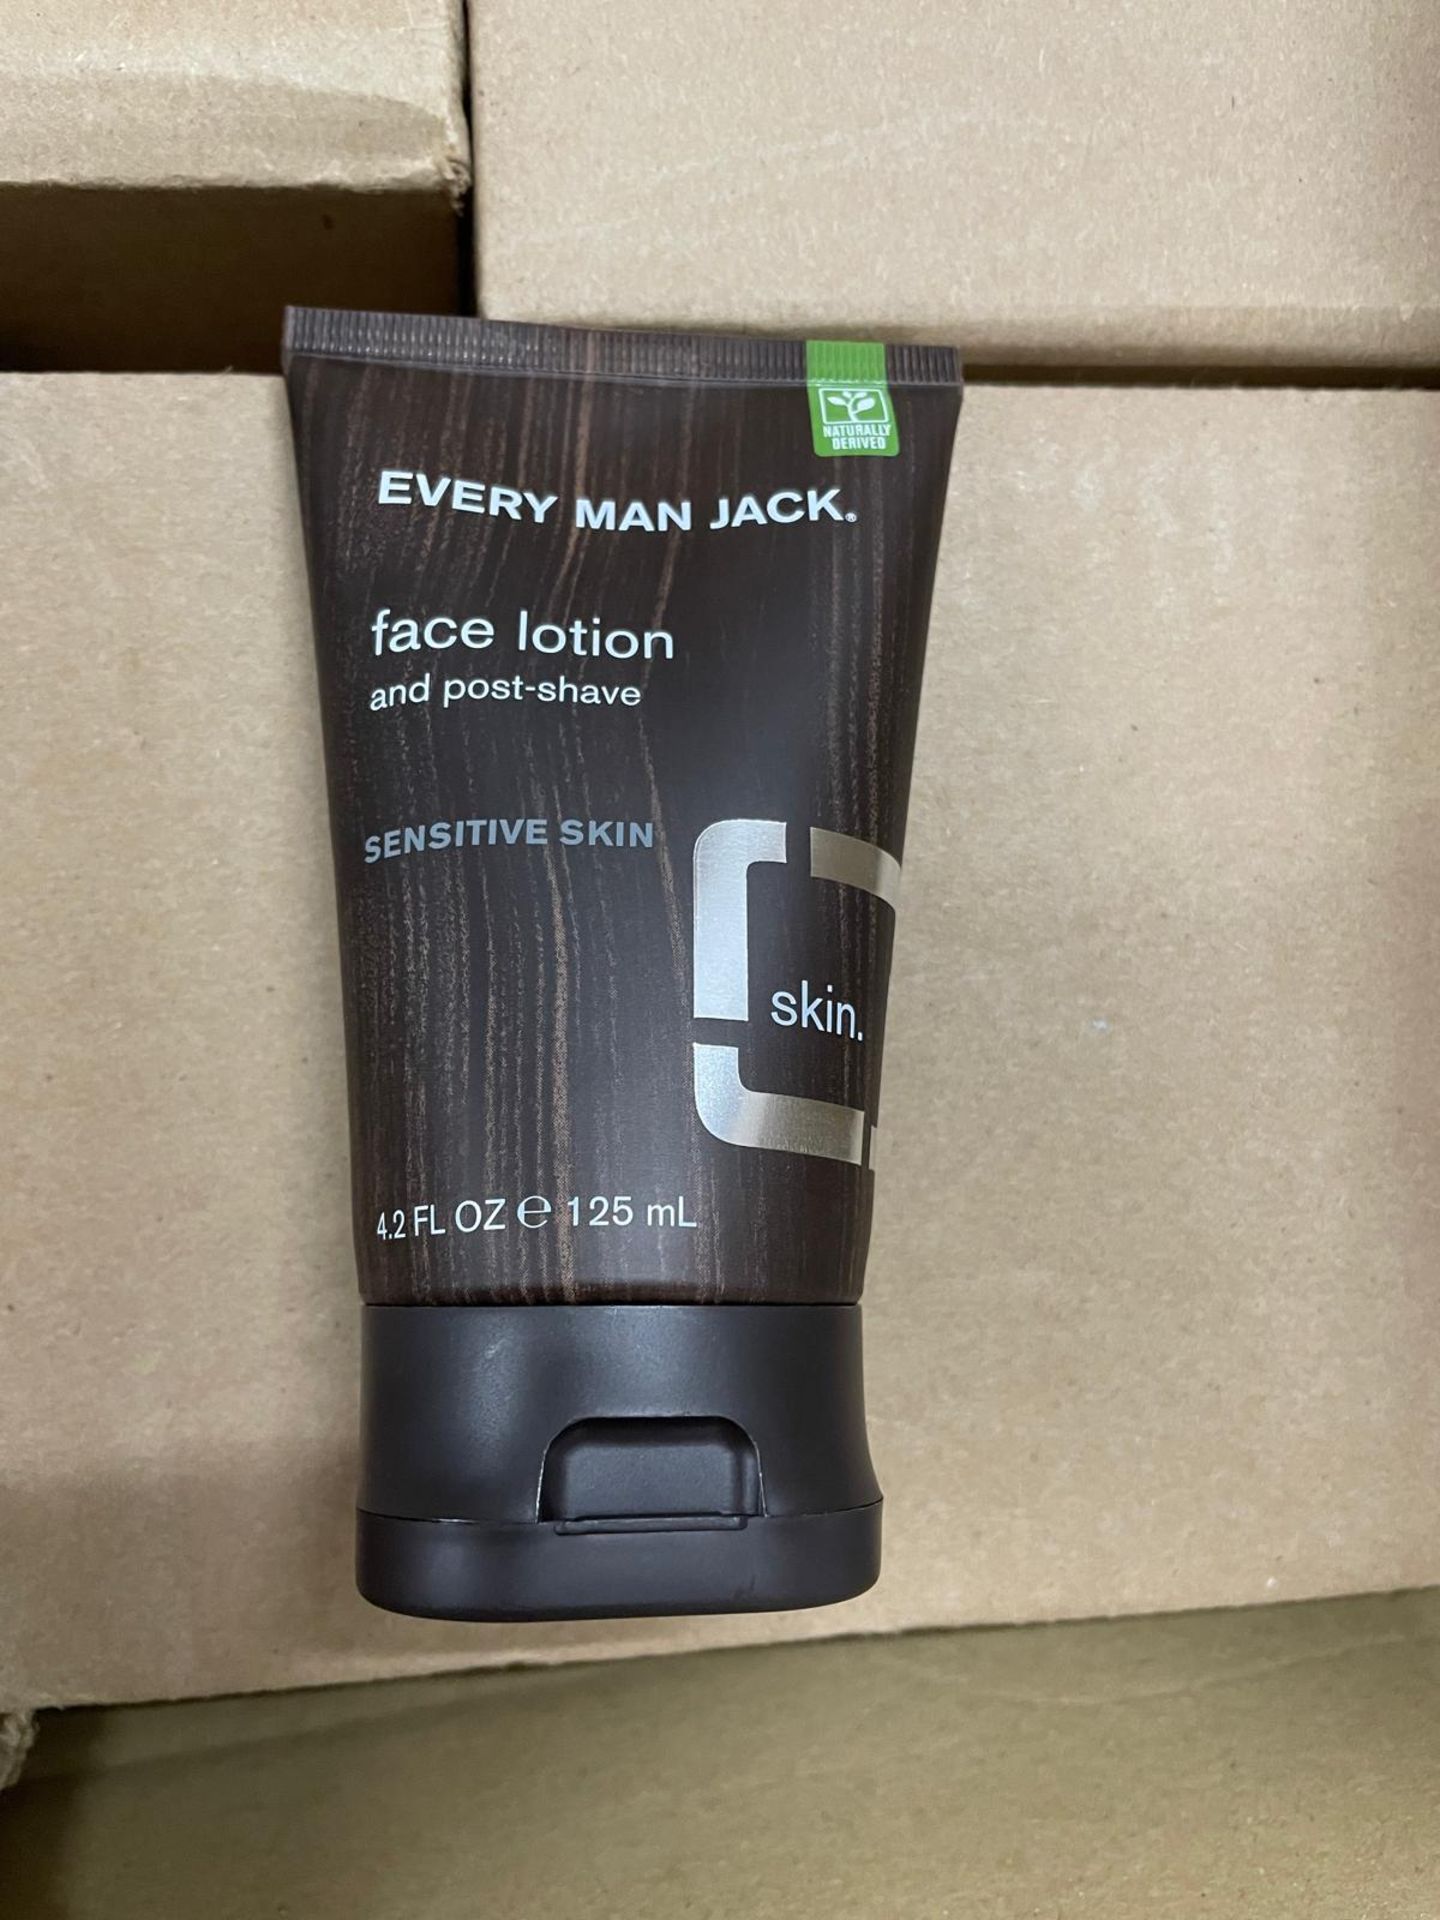 Every Man Jack Face Lotion and Post Shave x120, Est Retail Value £1120